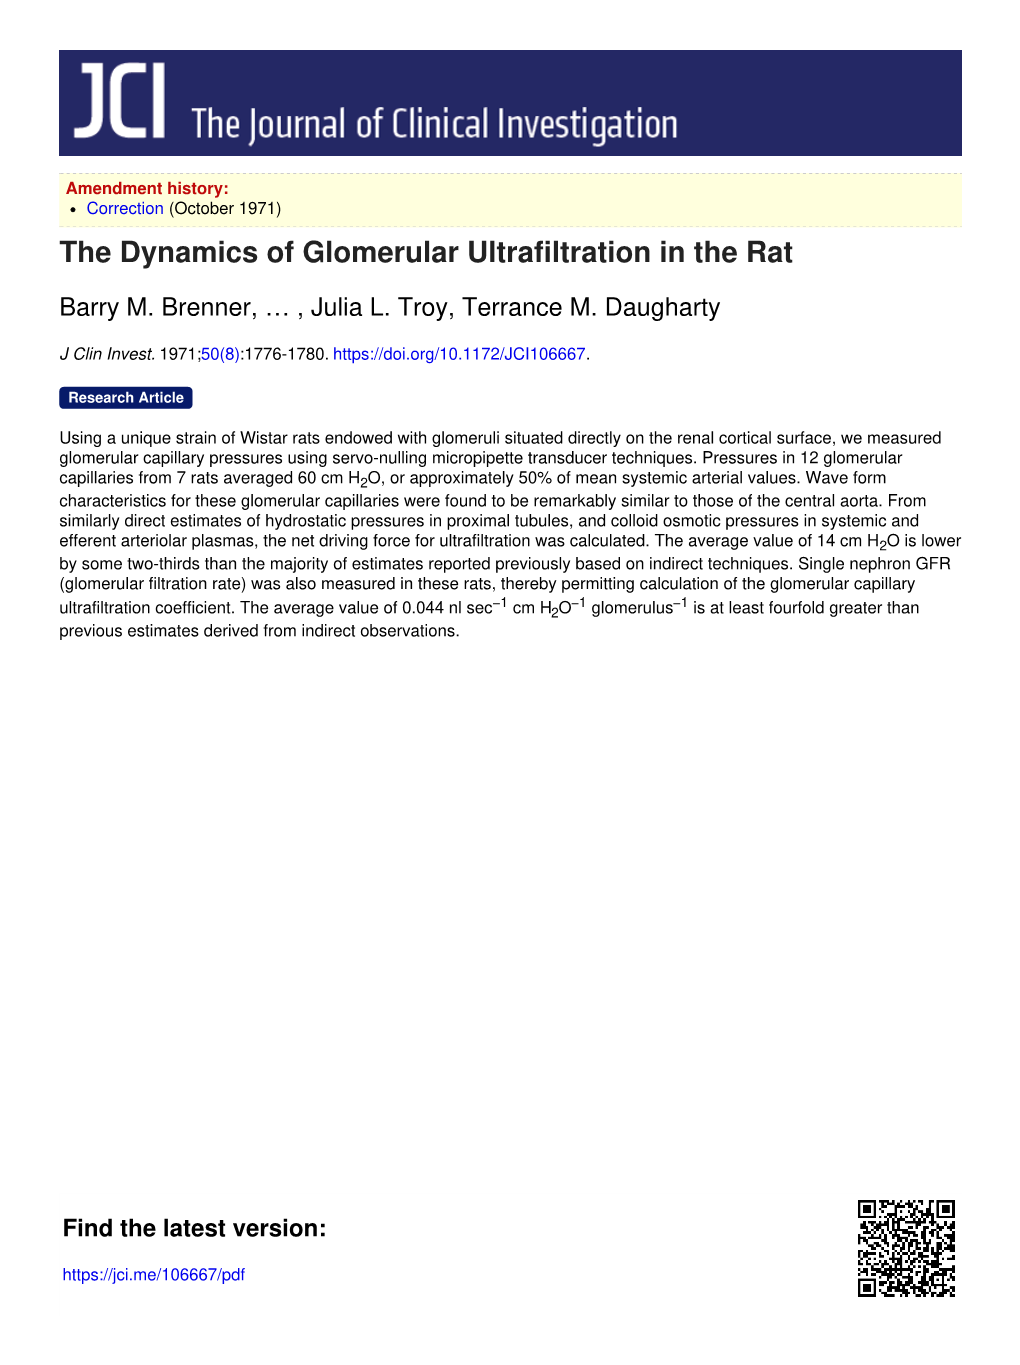 The Dynamics of Glomerular Ultrafiltration in the Rat